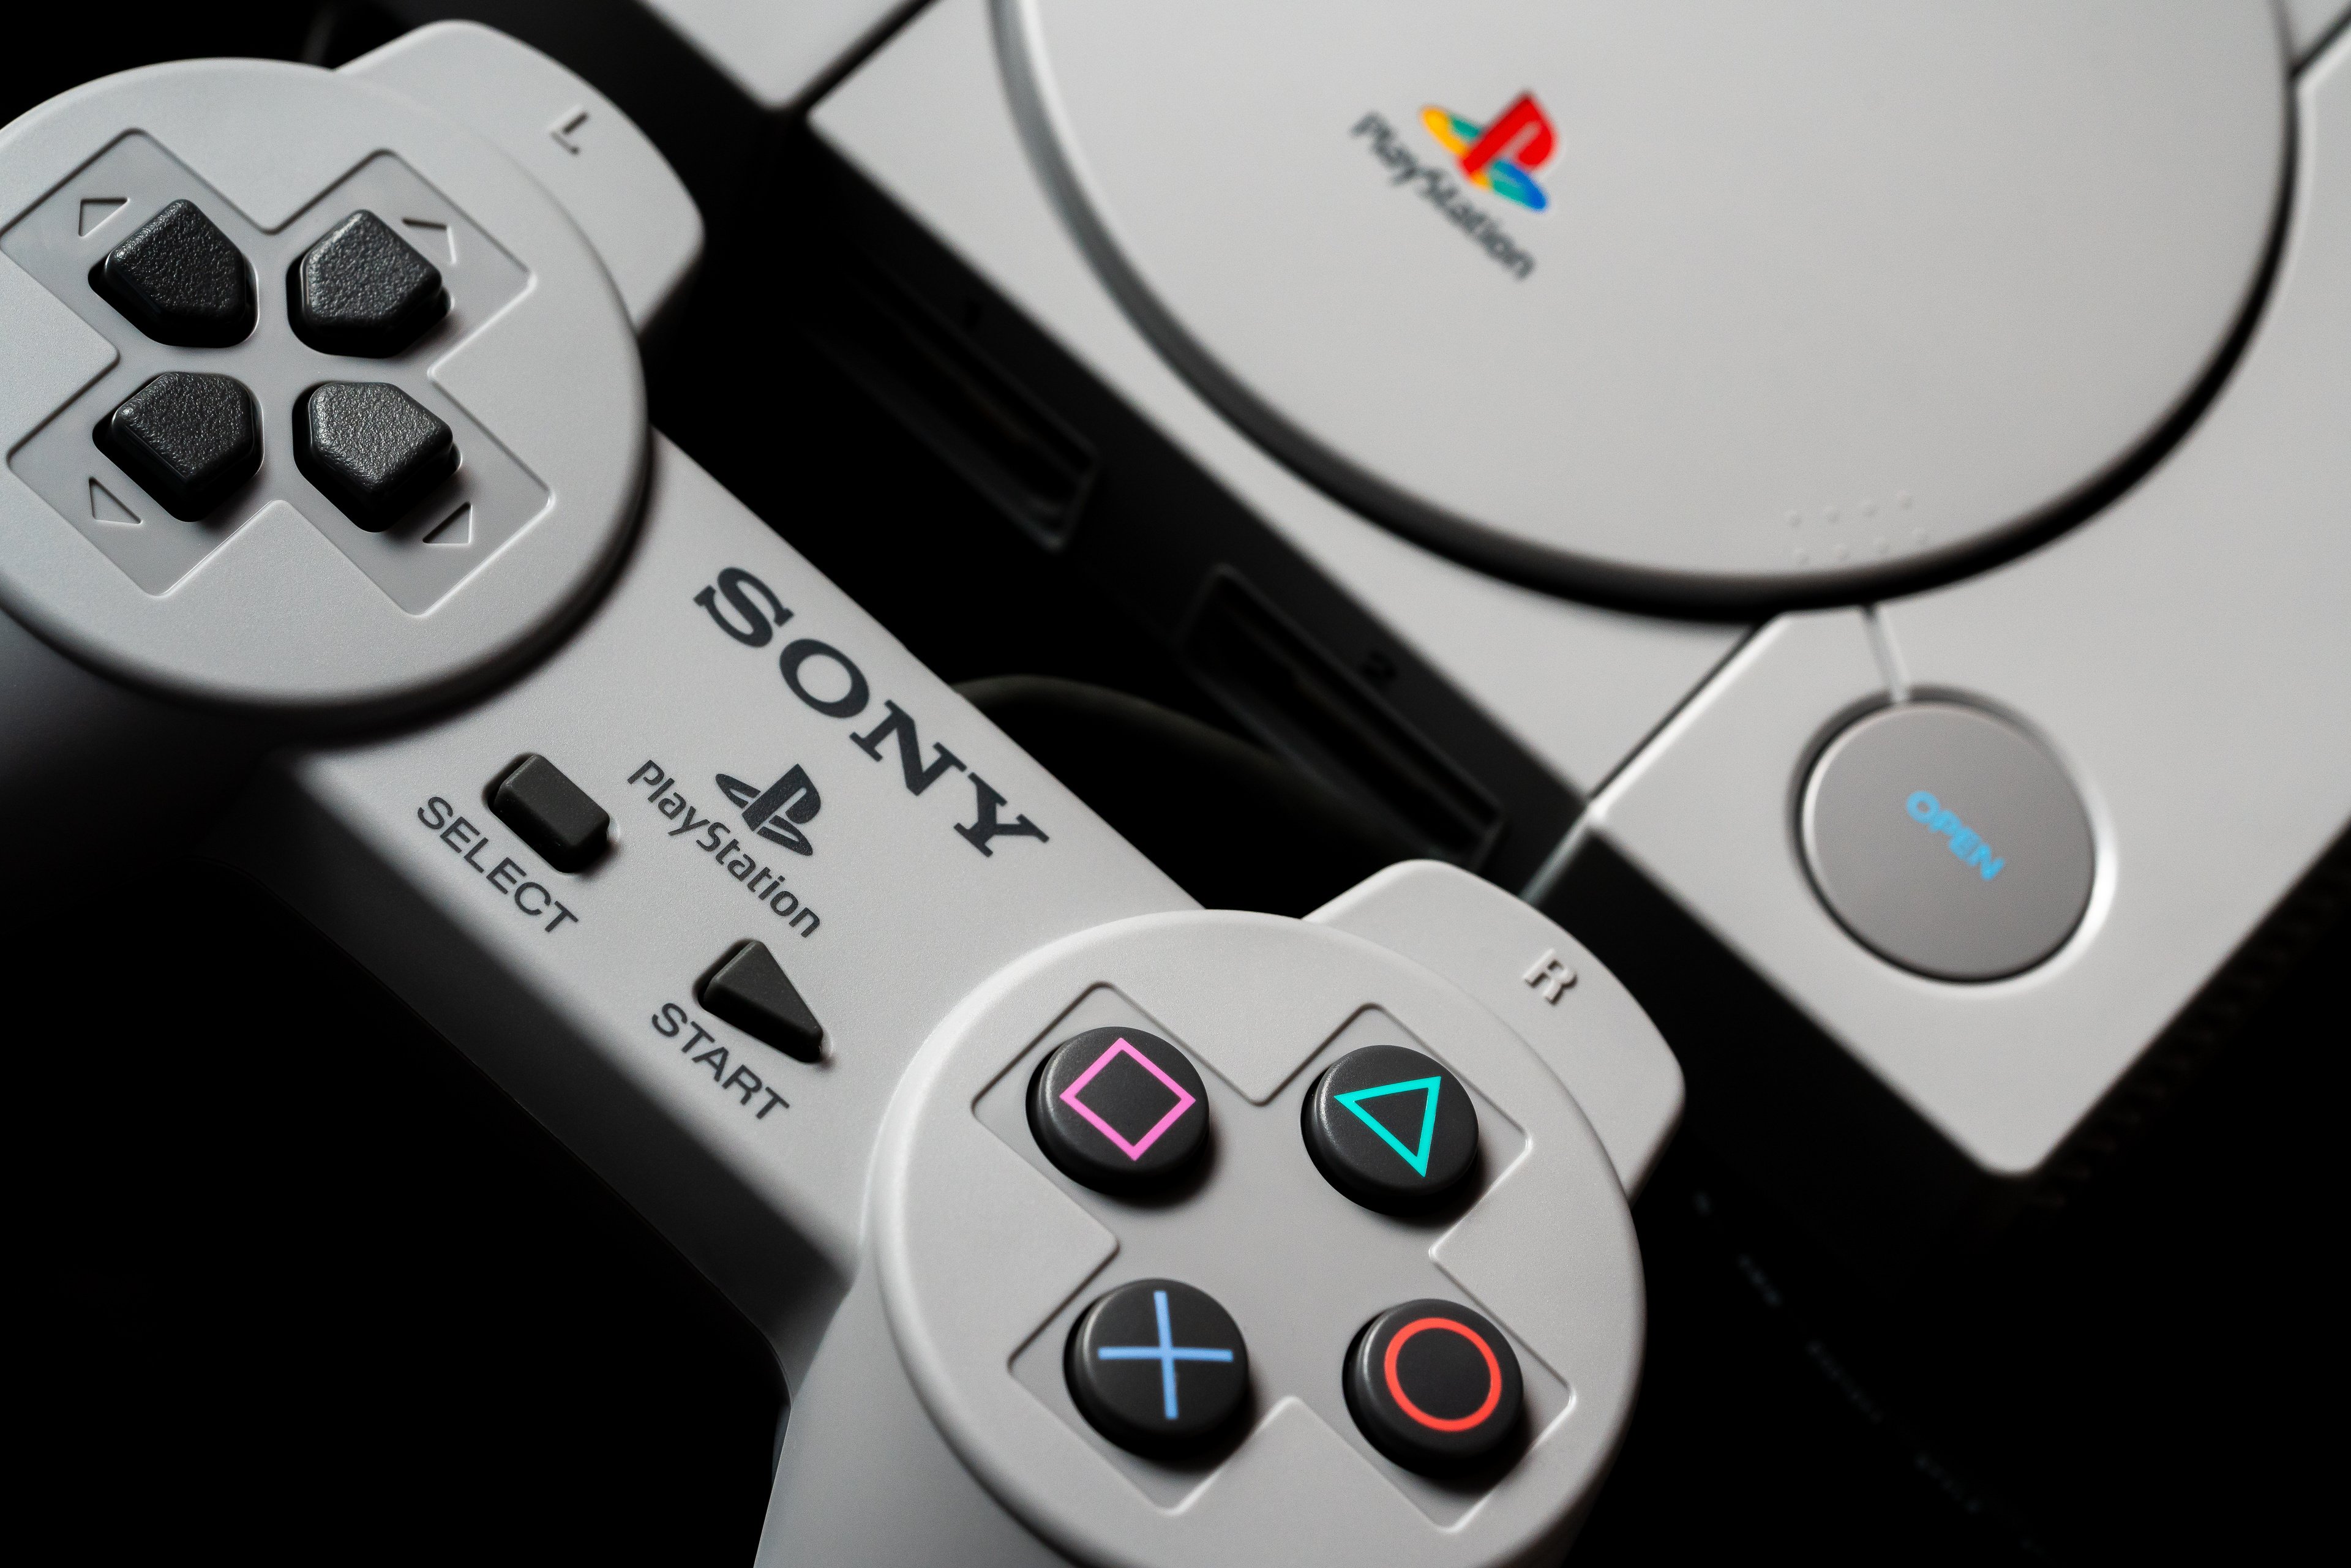 playstation one remake